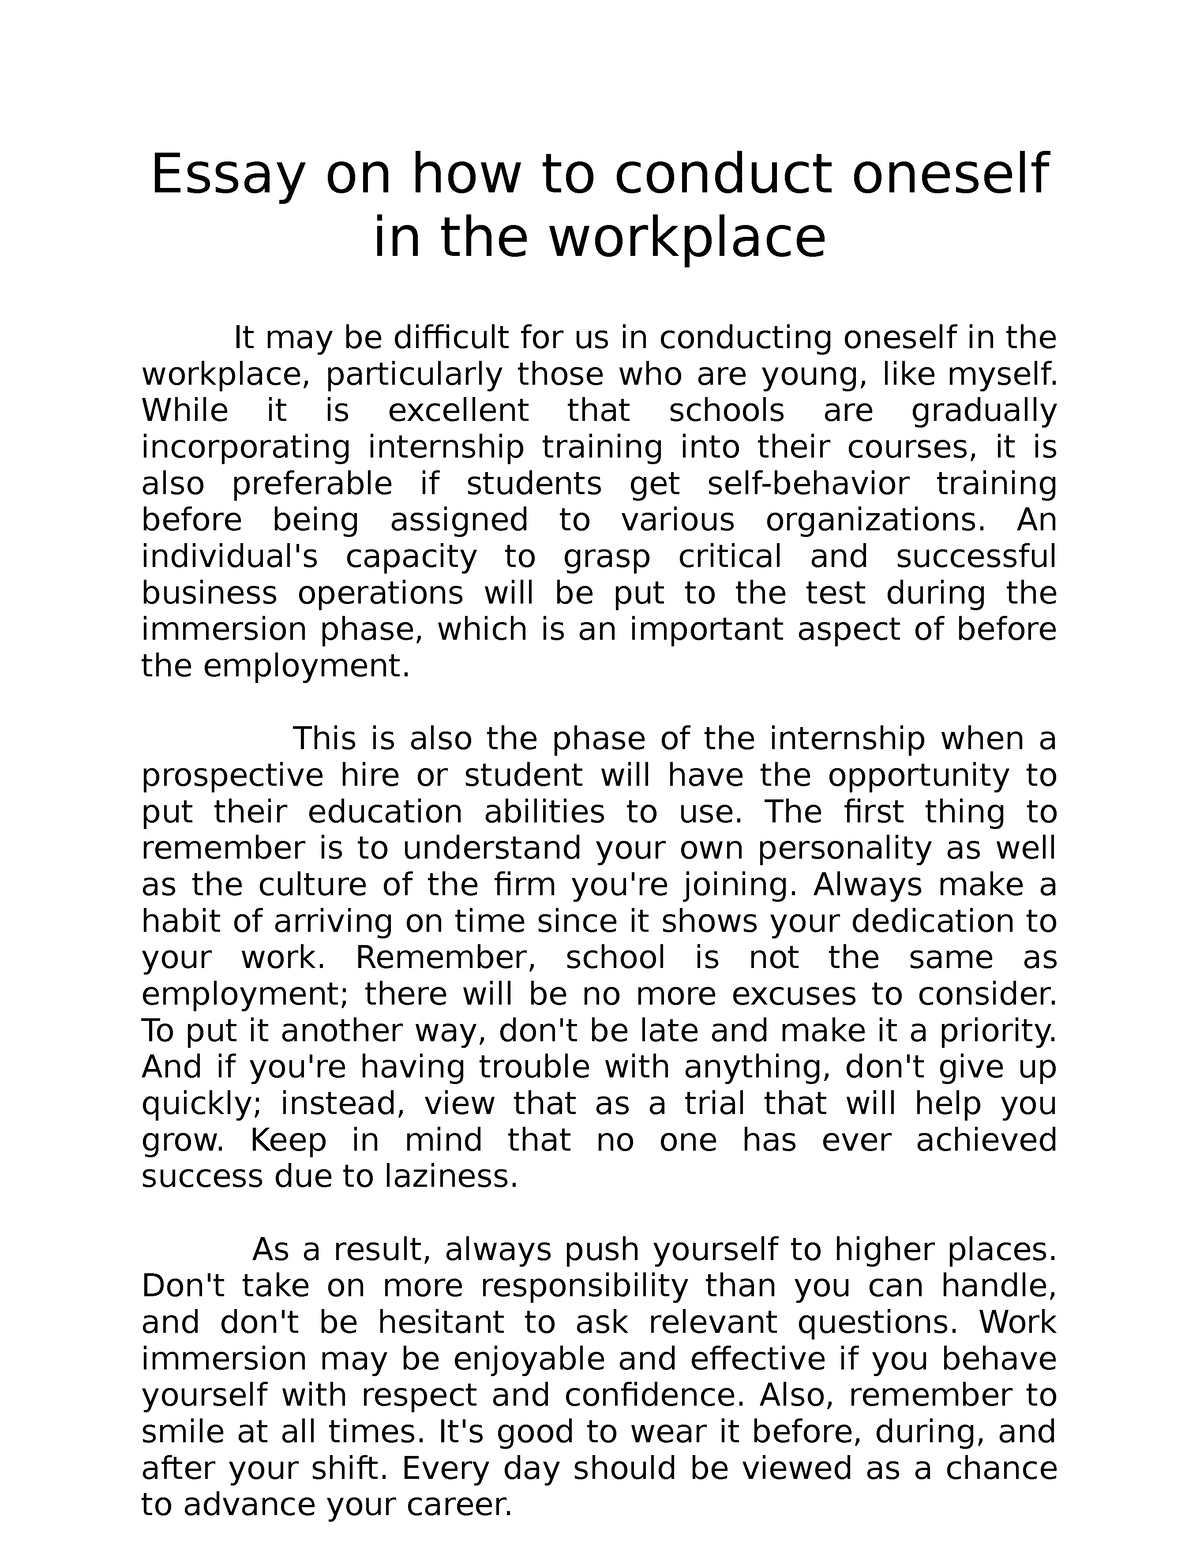 essay on how to conduct oneself in work immersion